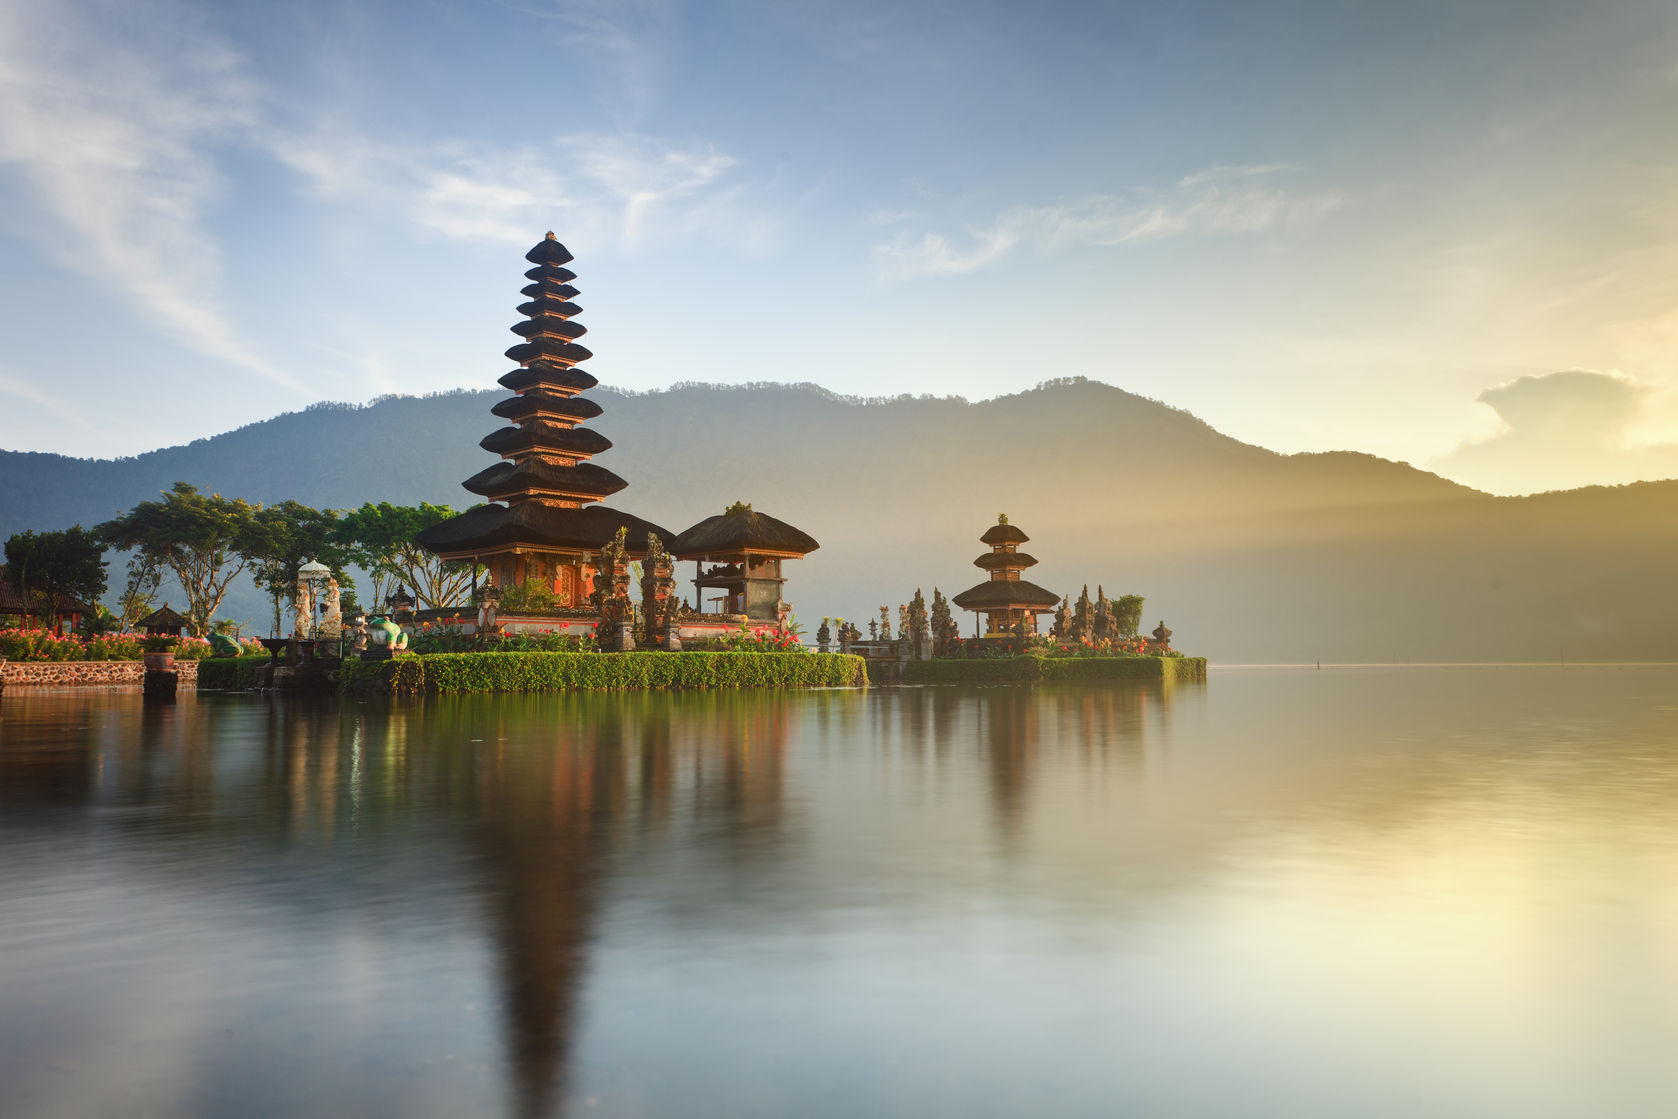 Indonesian Omnibus Bill – Changes To The Company Law.